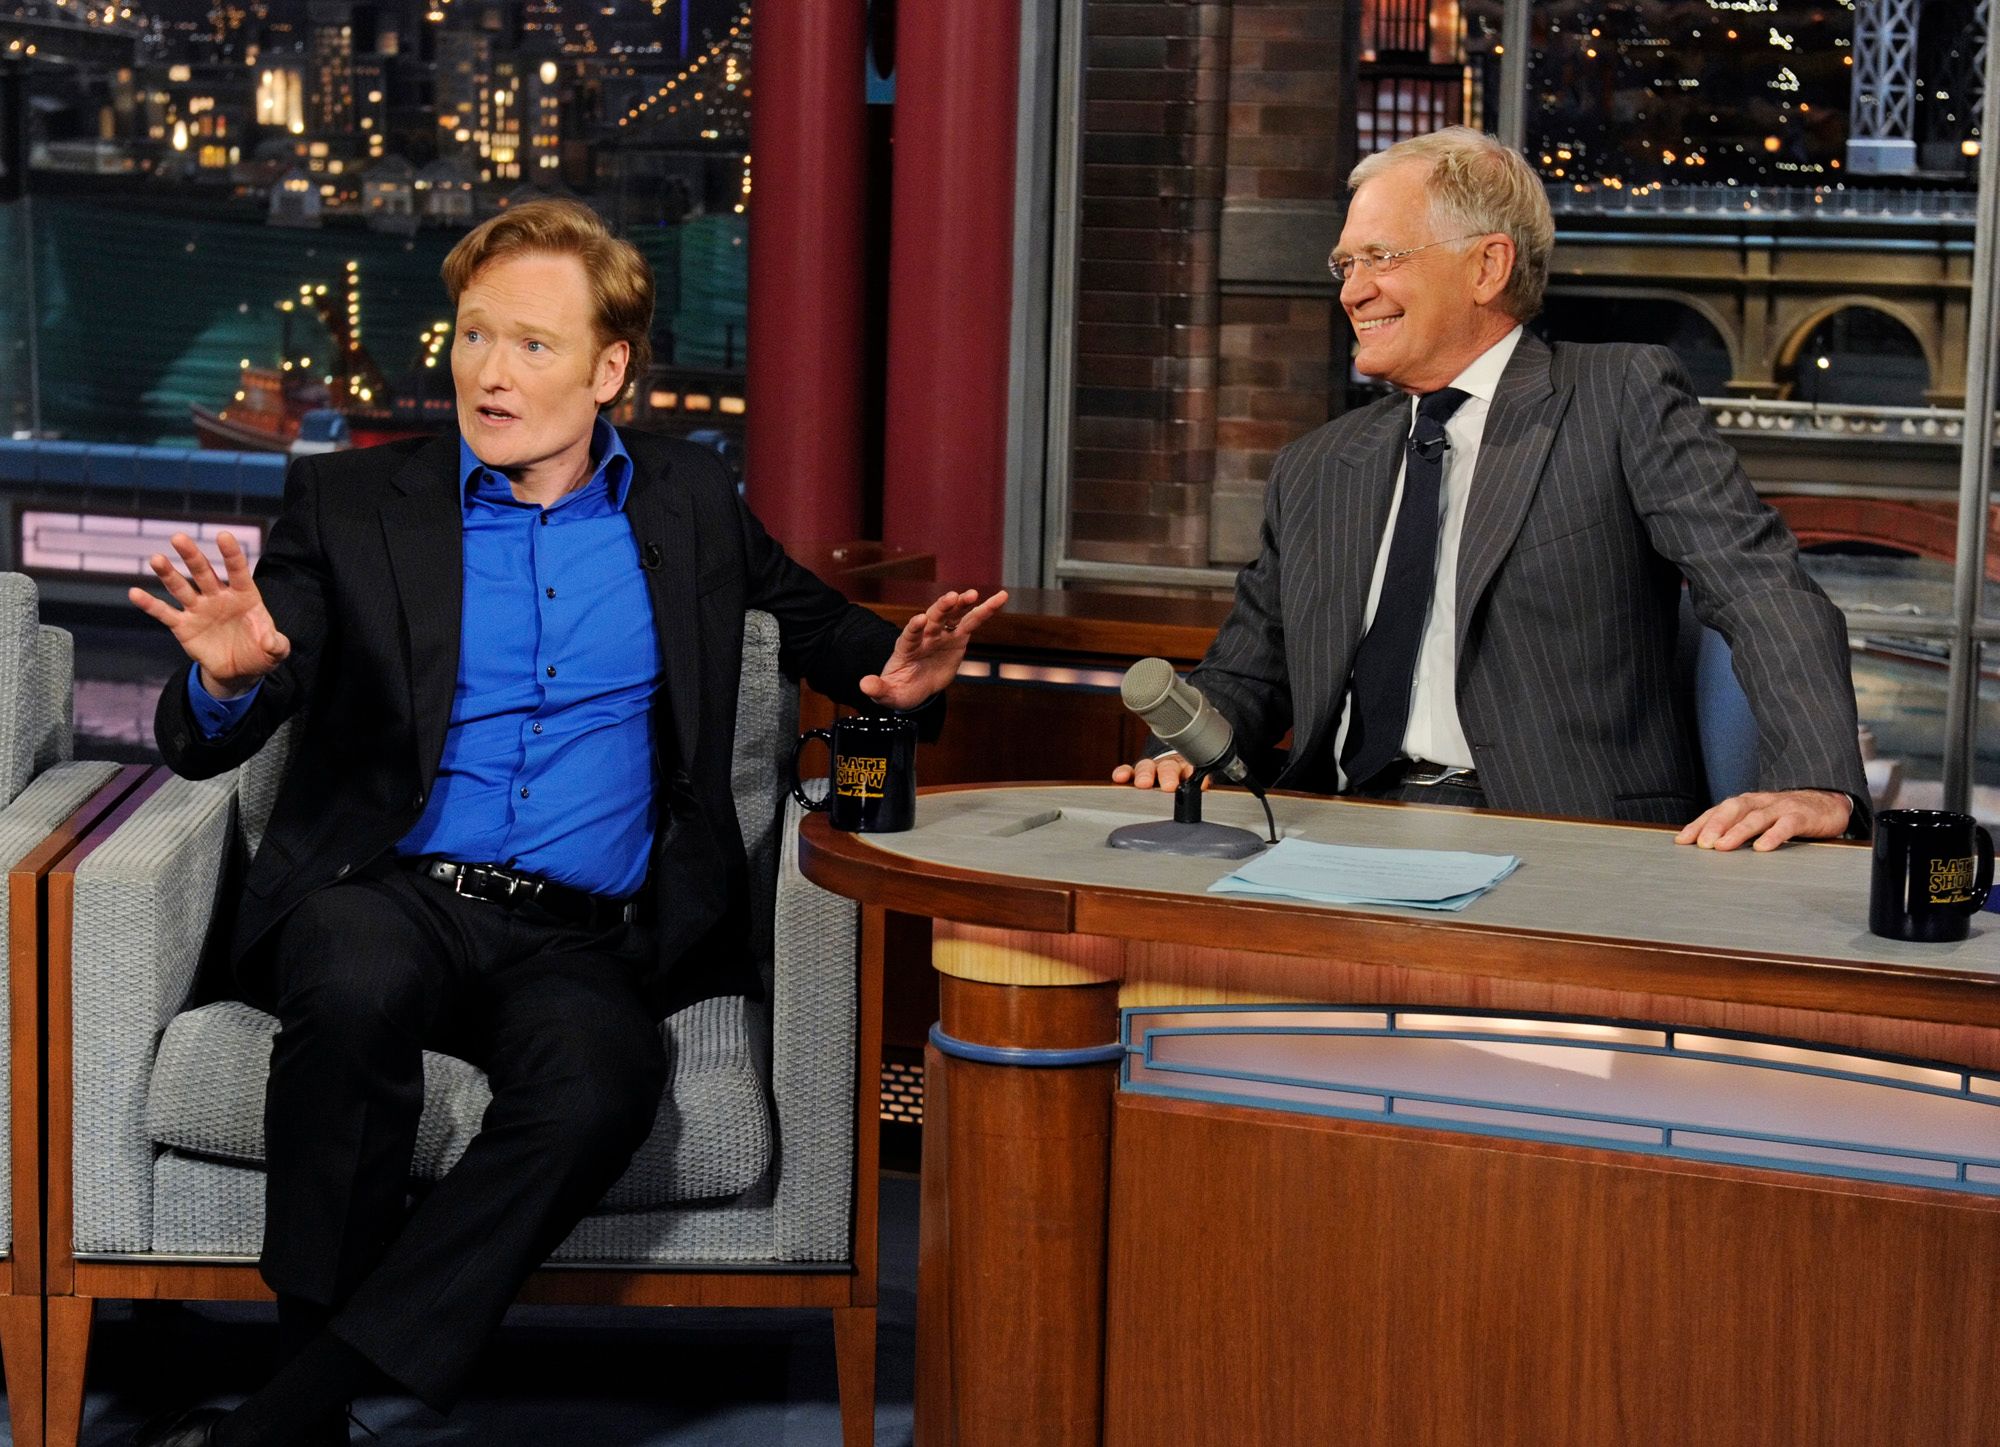 Can Conan O'Brien's Brand of Humor Work on 'The Tonight Show